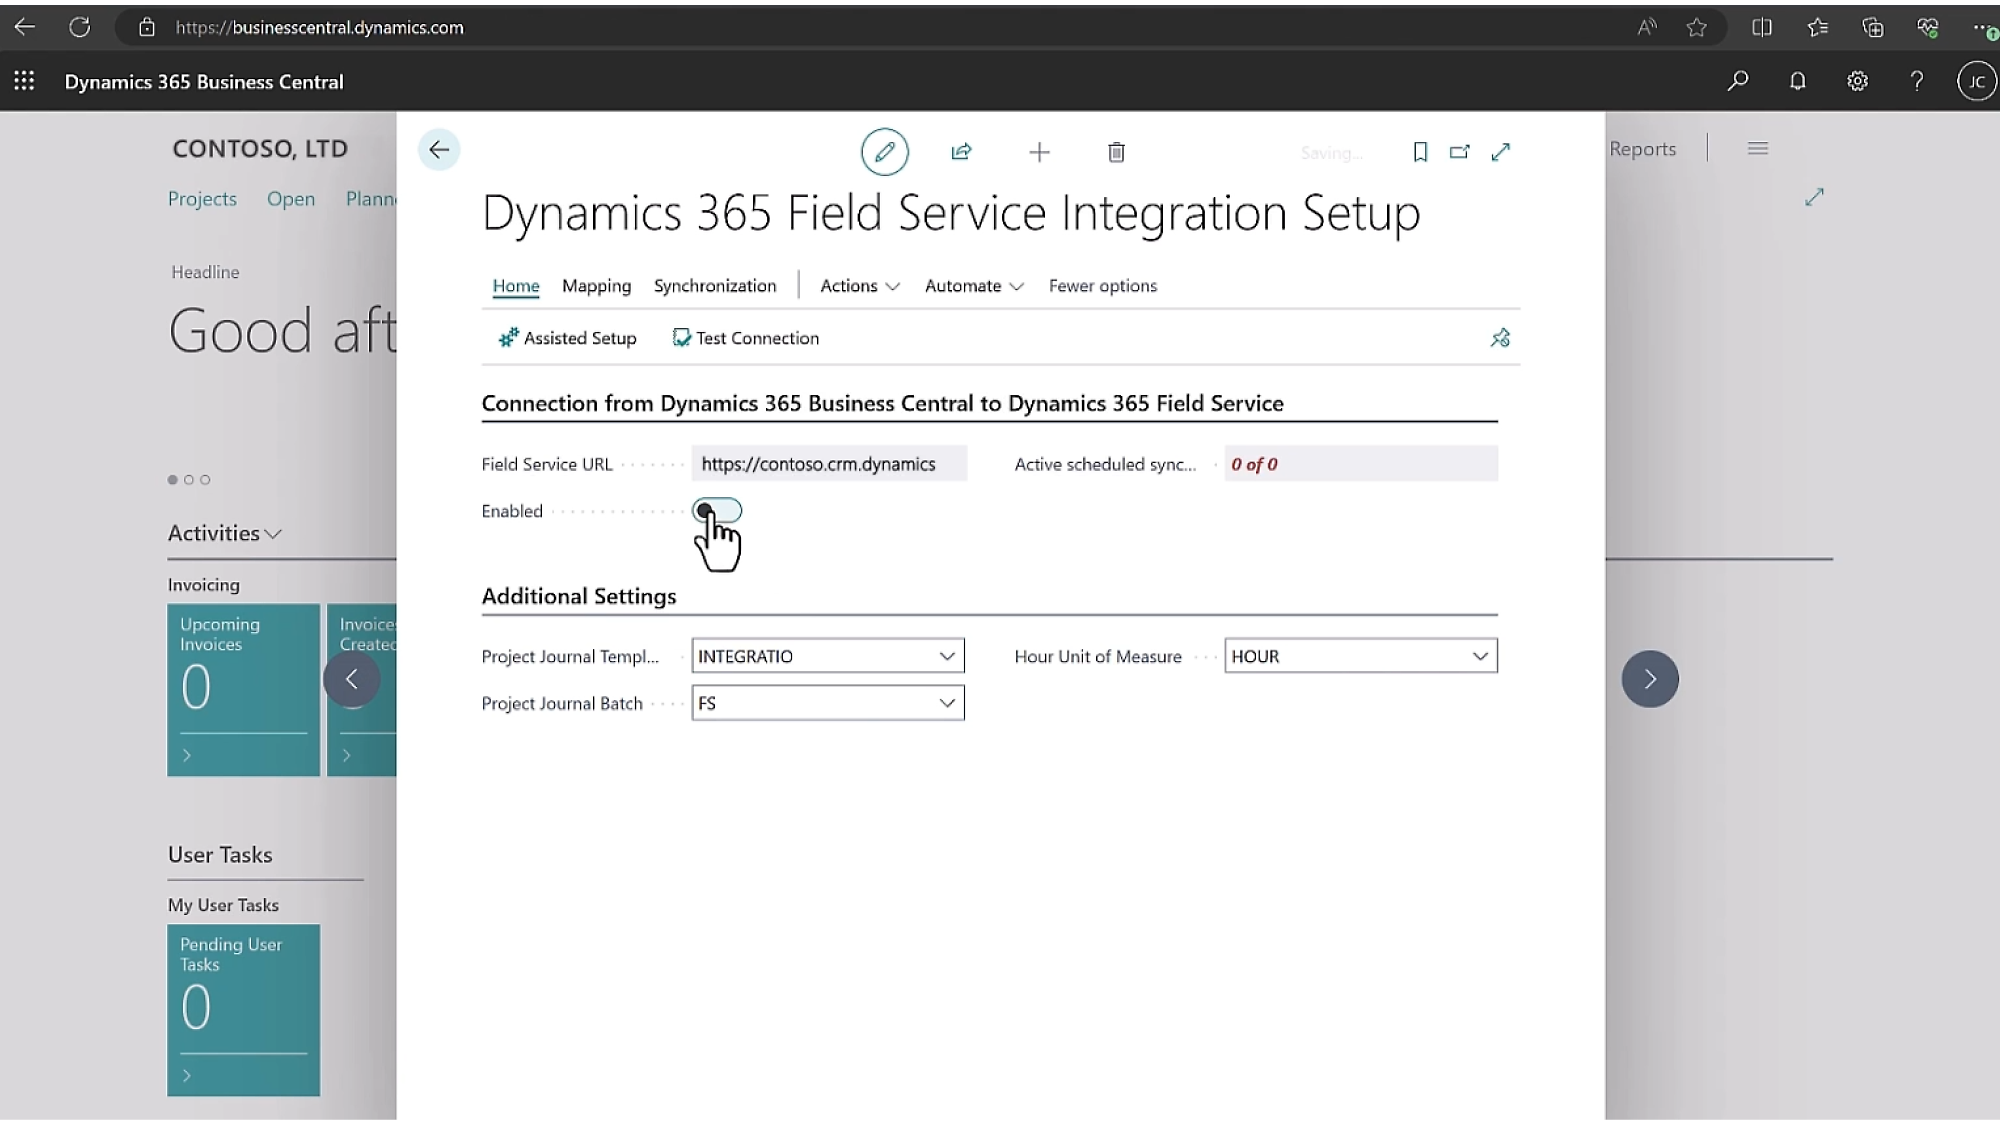 A dashboard showing Dynamics 365 and showing some fields are enabling